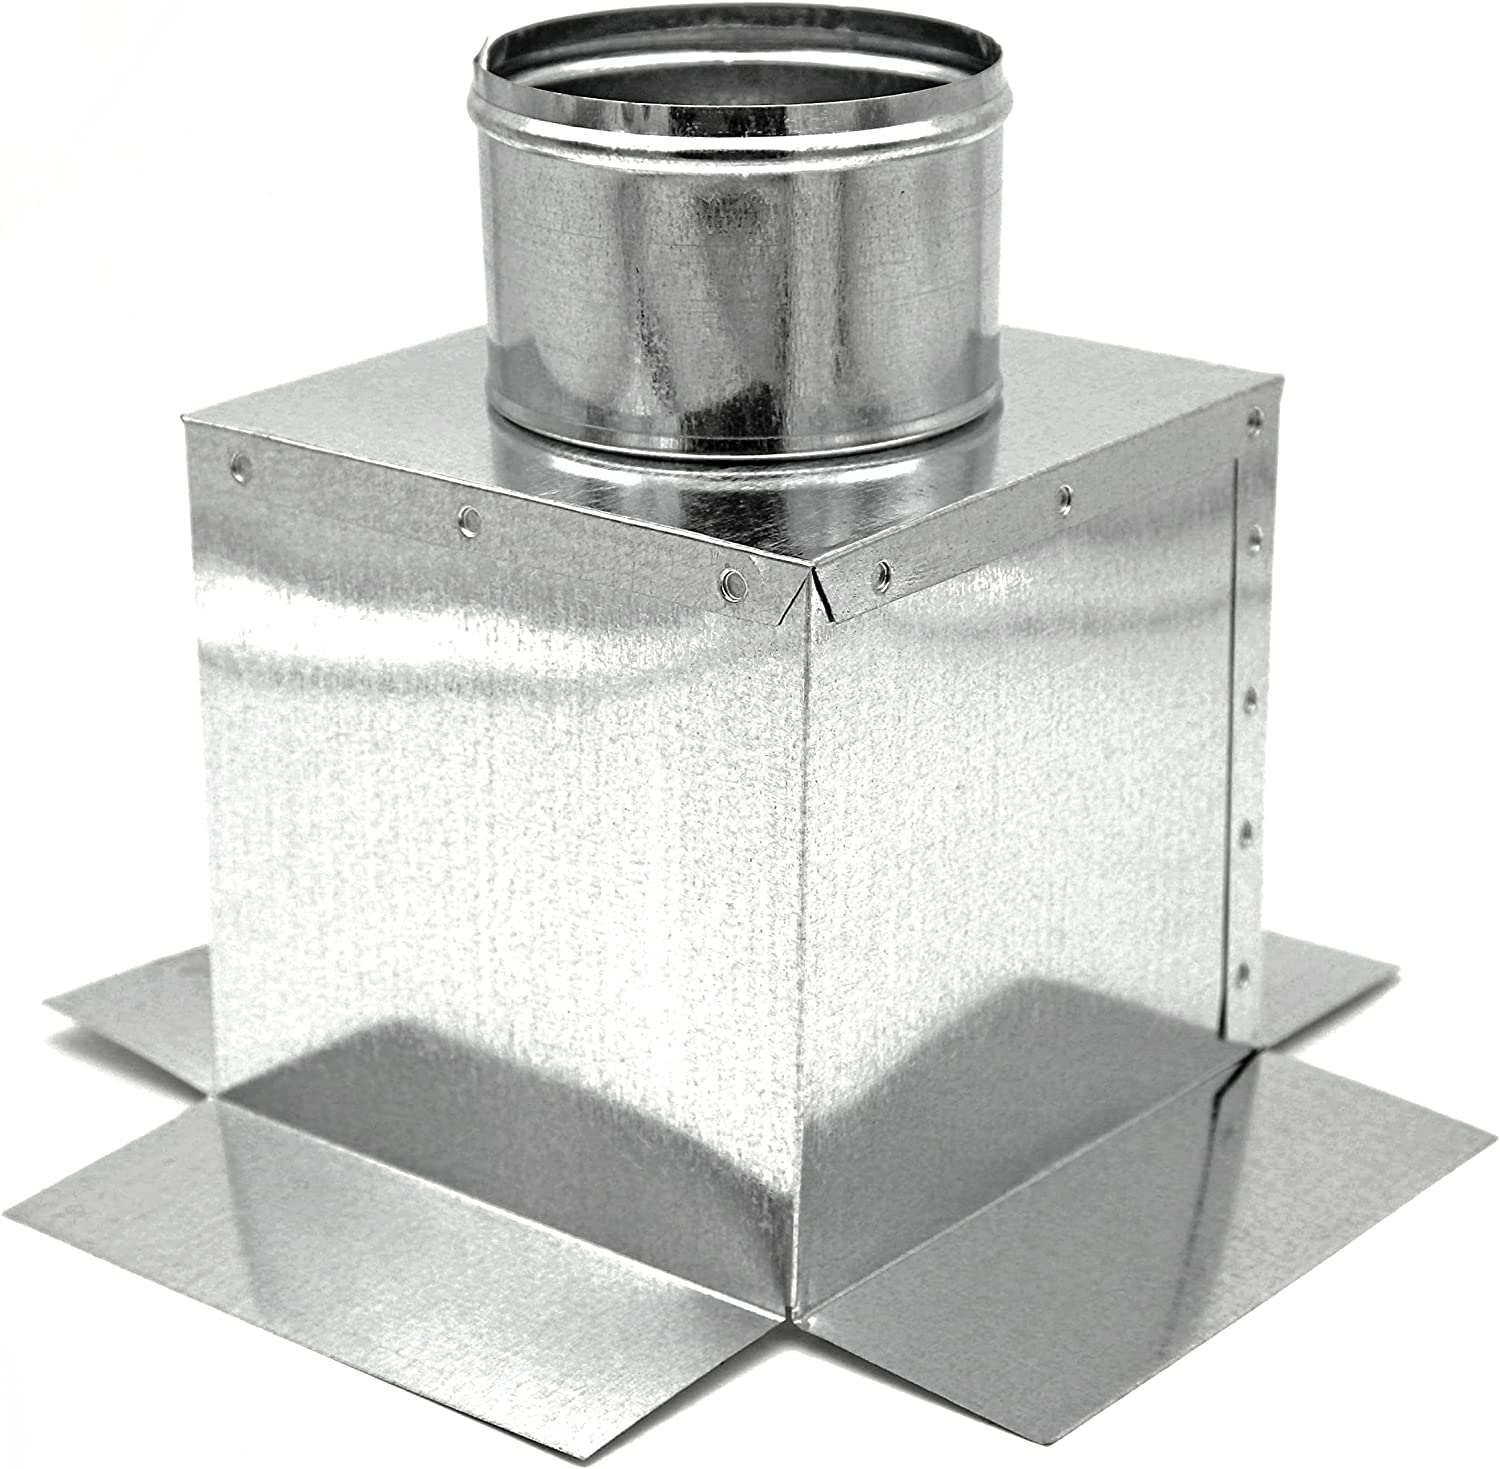 HVAC Plenum Ceiling Box | Top Ceiling Box | 6" X 6" X 4" Galvanized Steel Metal Ceiling Box is Compatible with Duct 4"